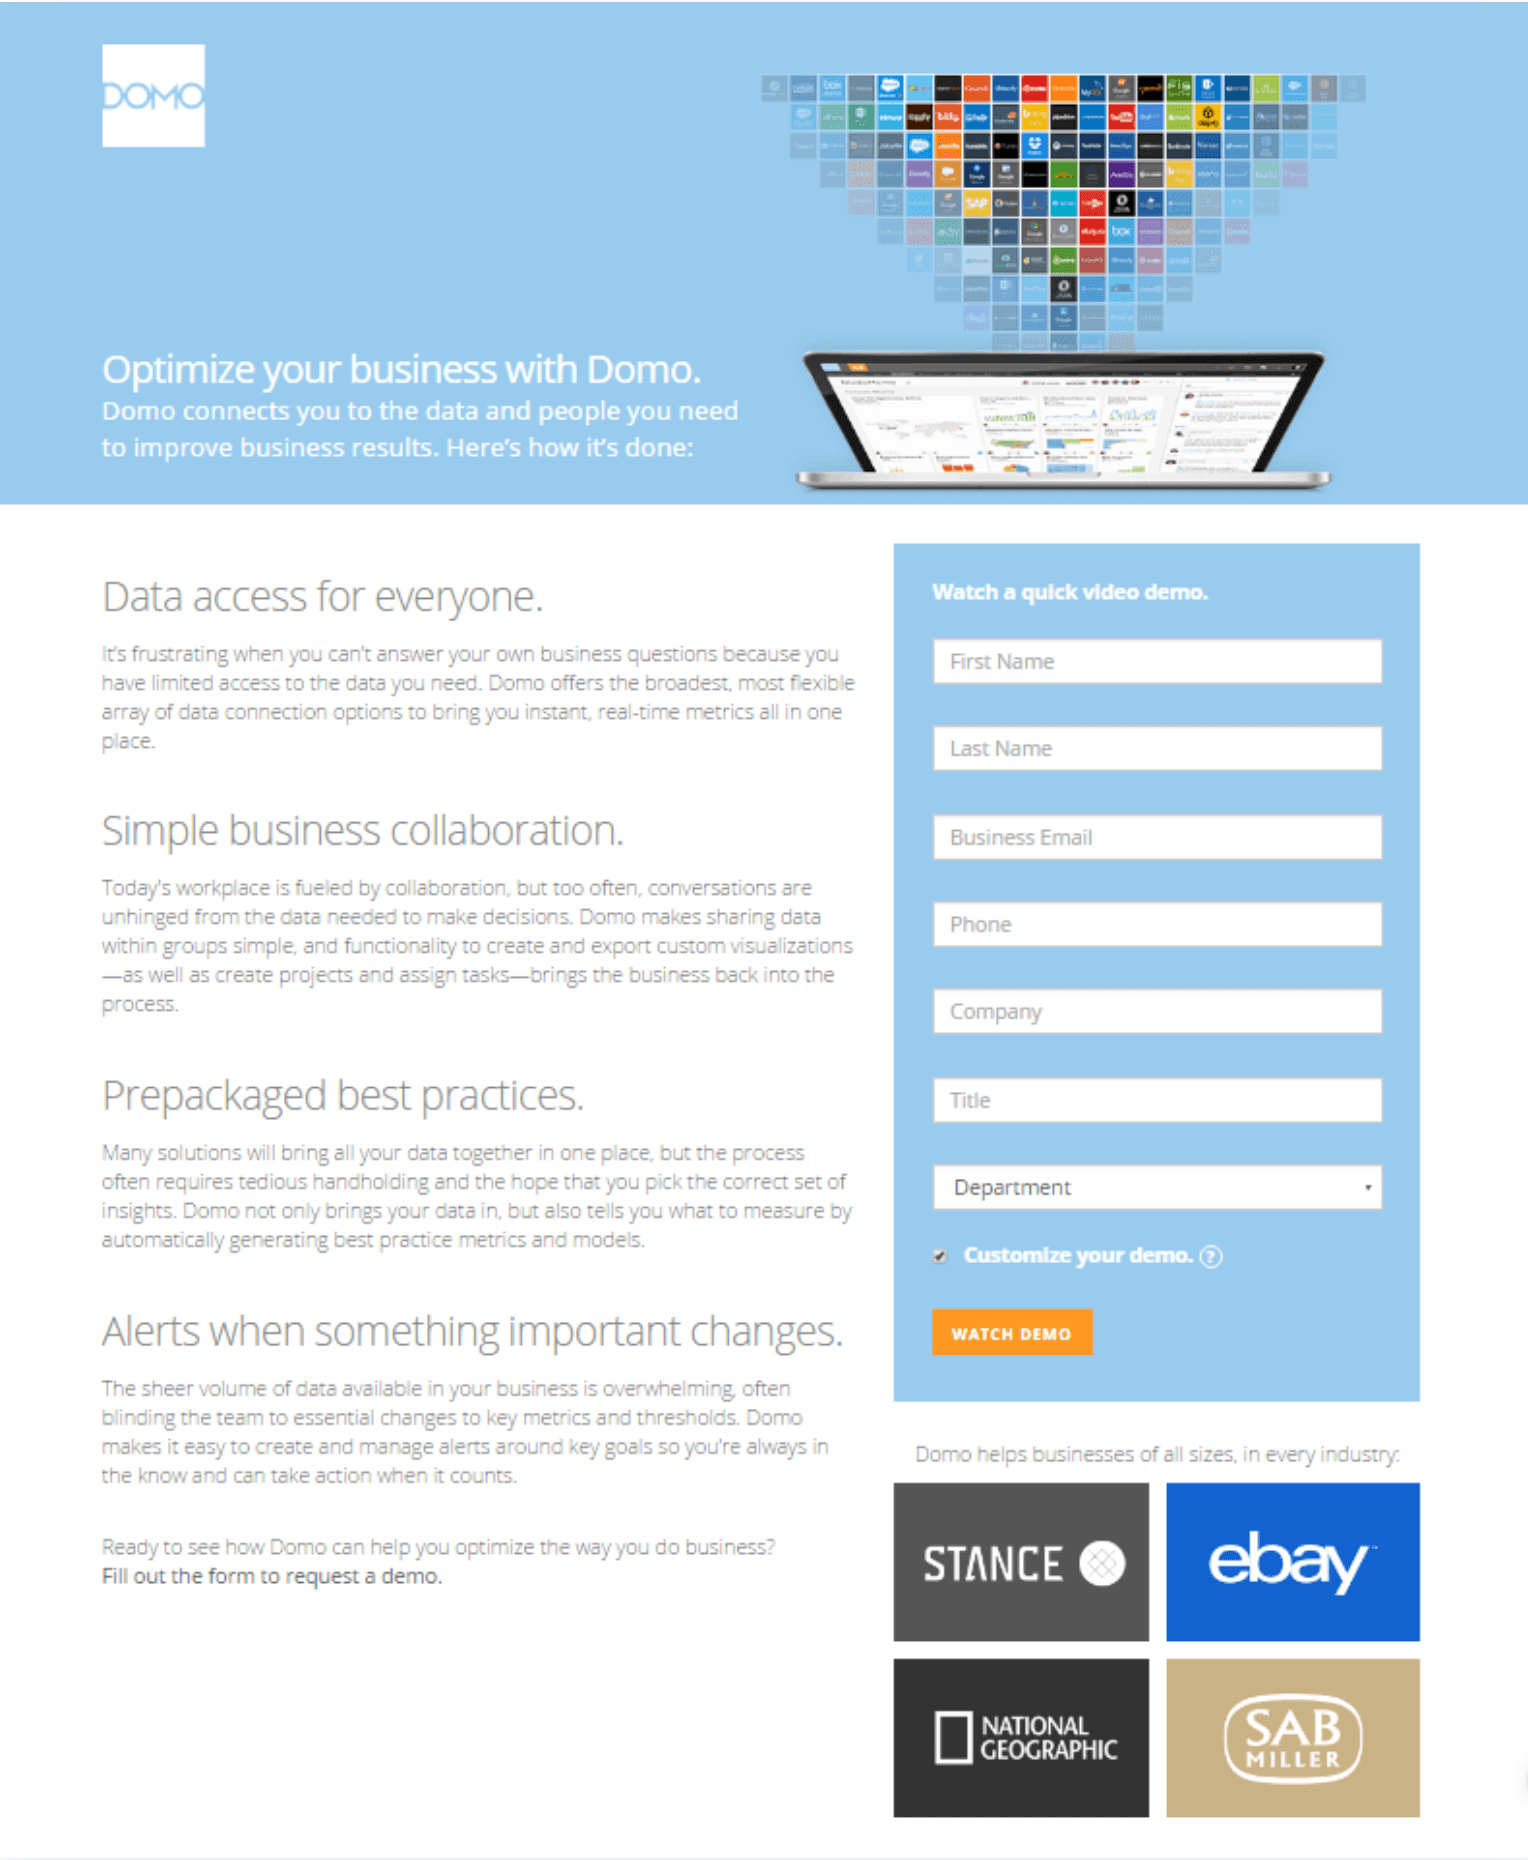 A landing page for Domo offering a free demo in exchange for giving contact information